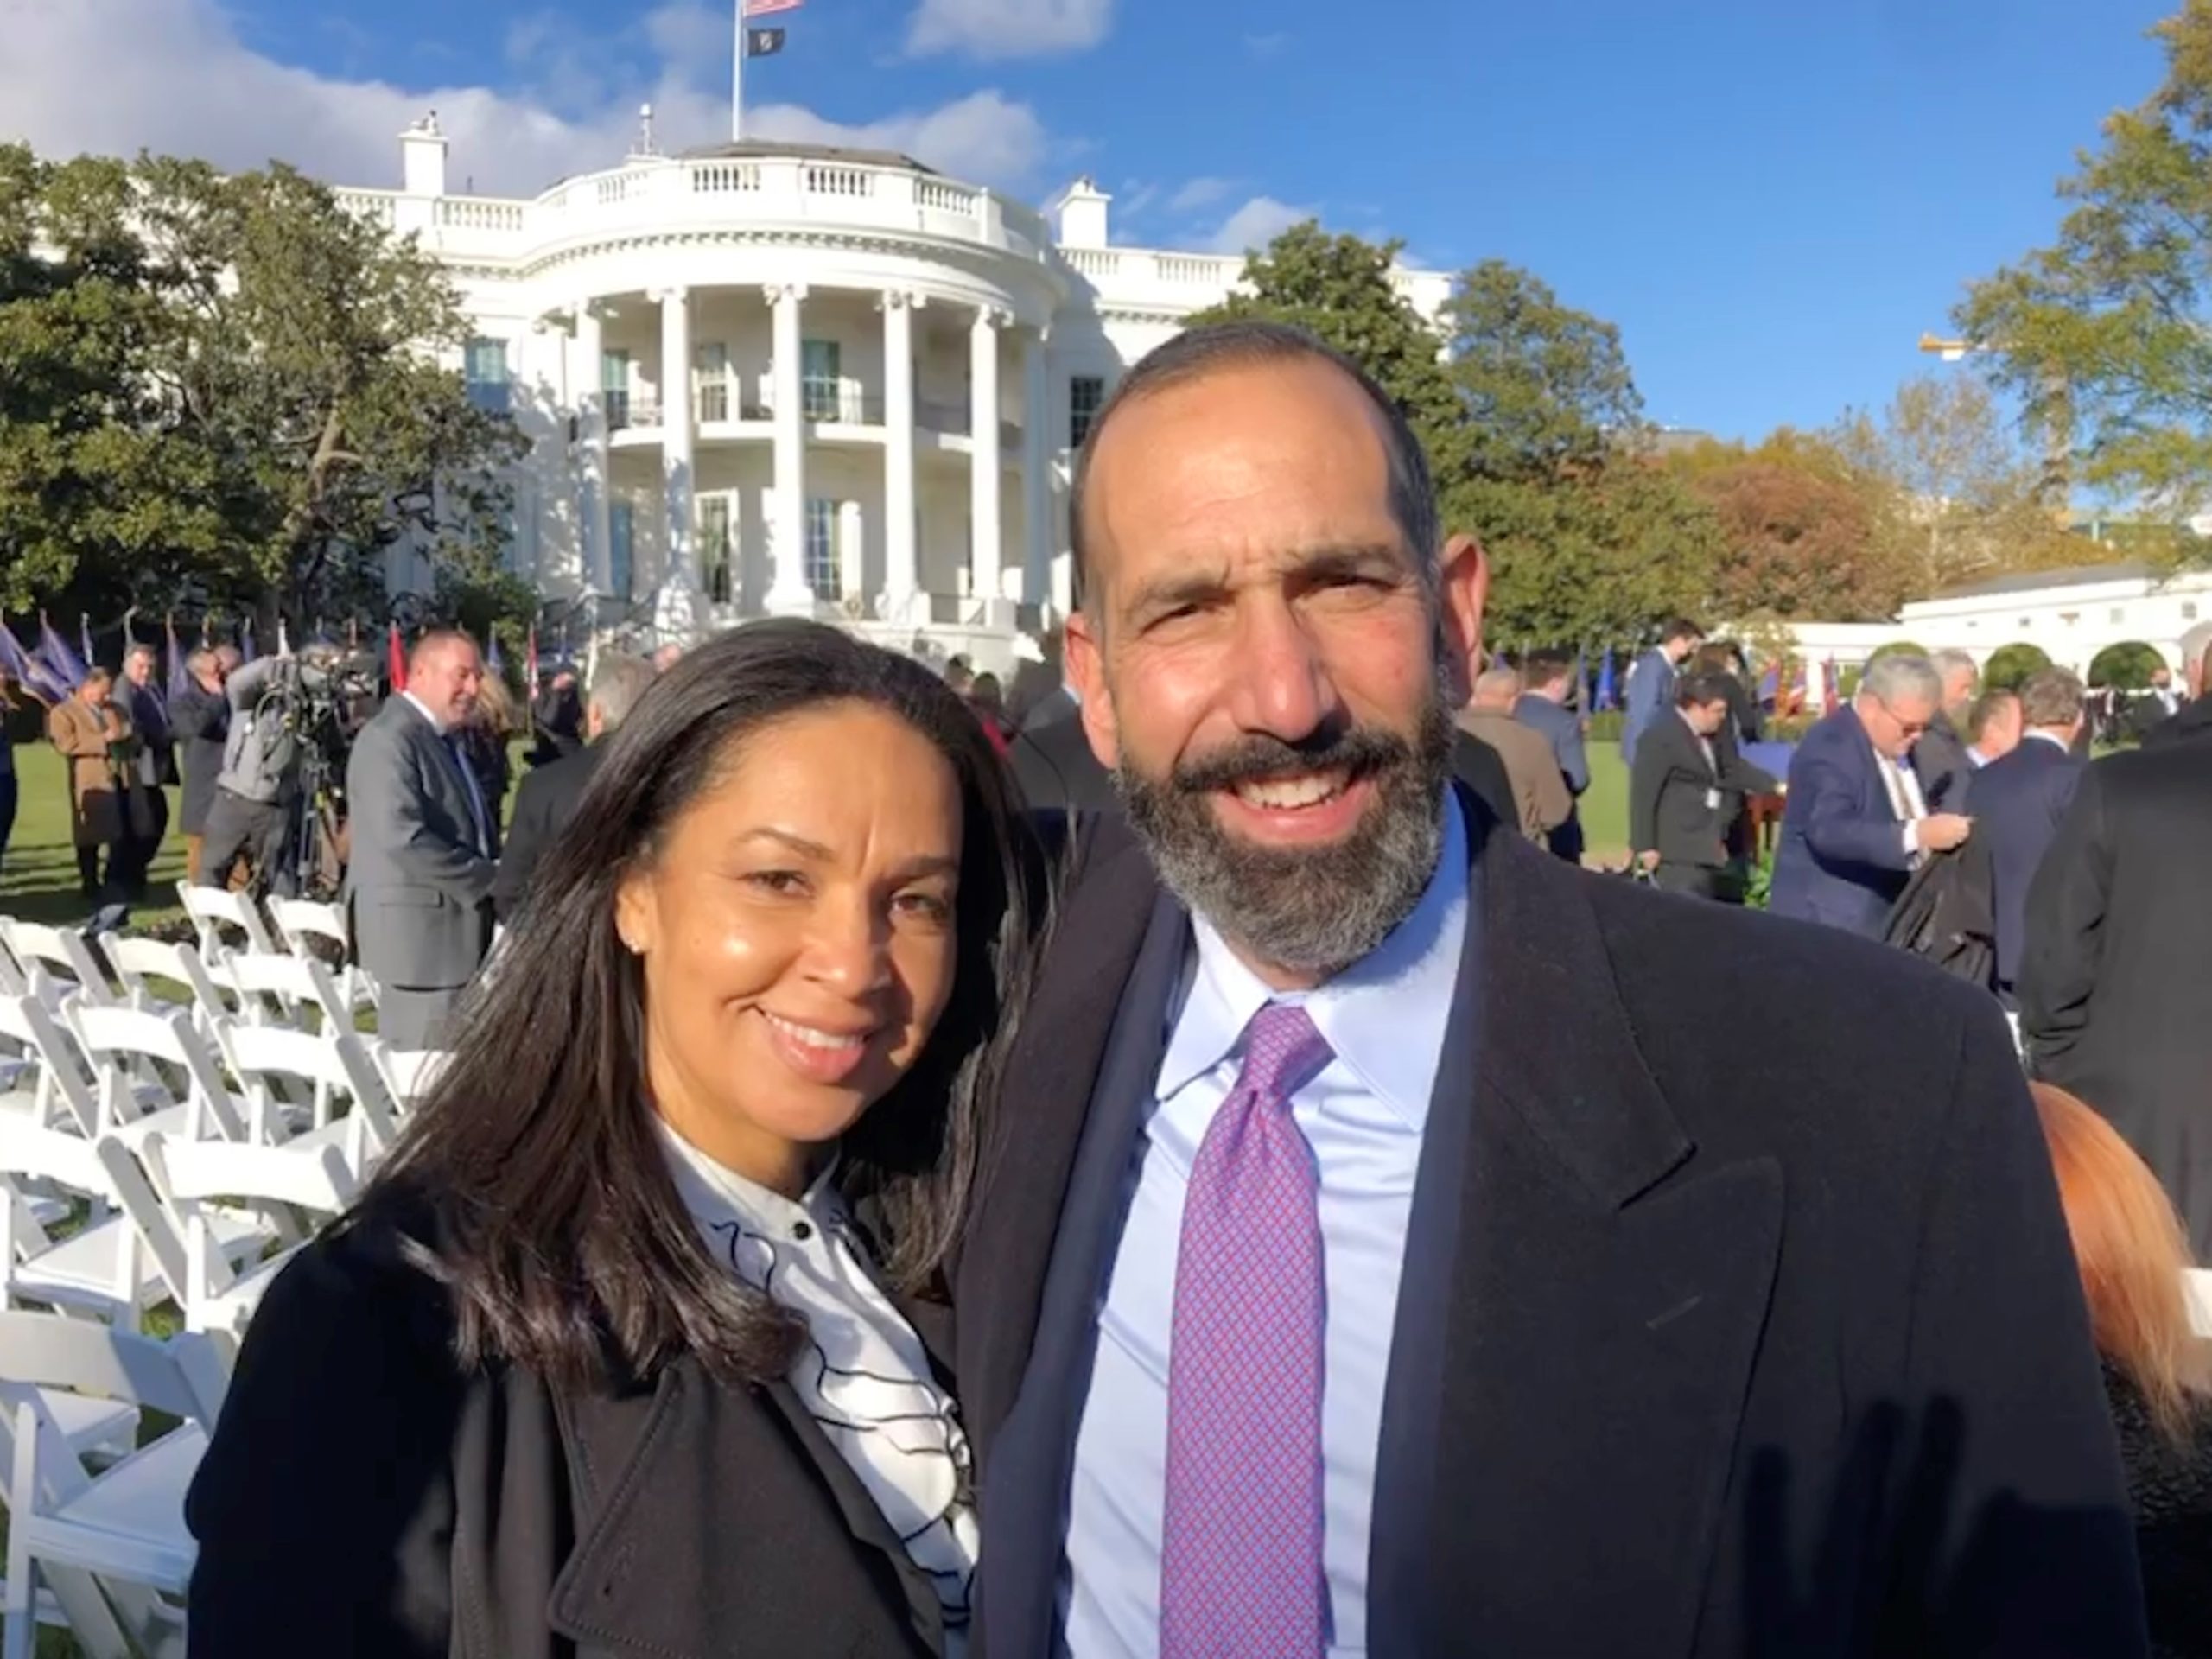 NIIAG - Lysa and Dan at the White House